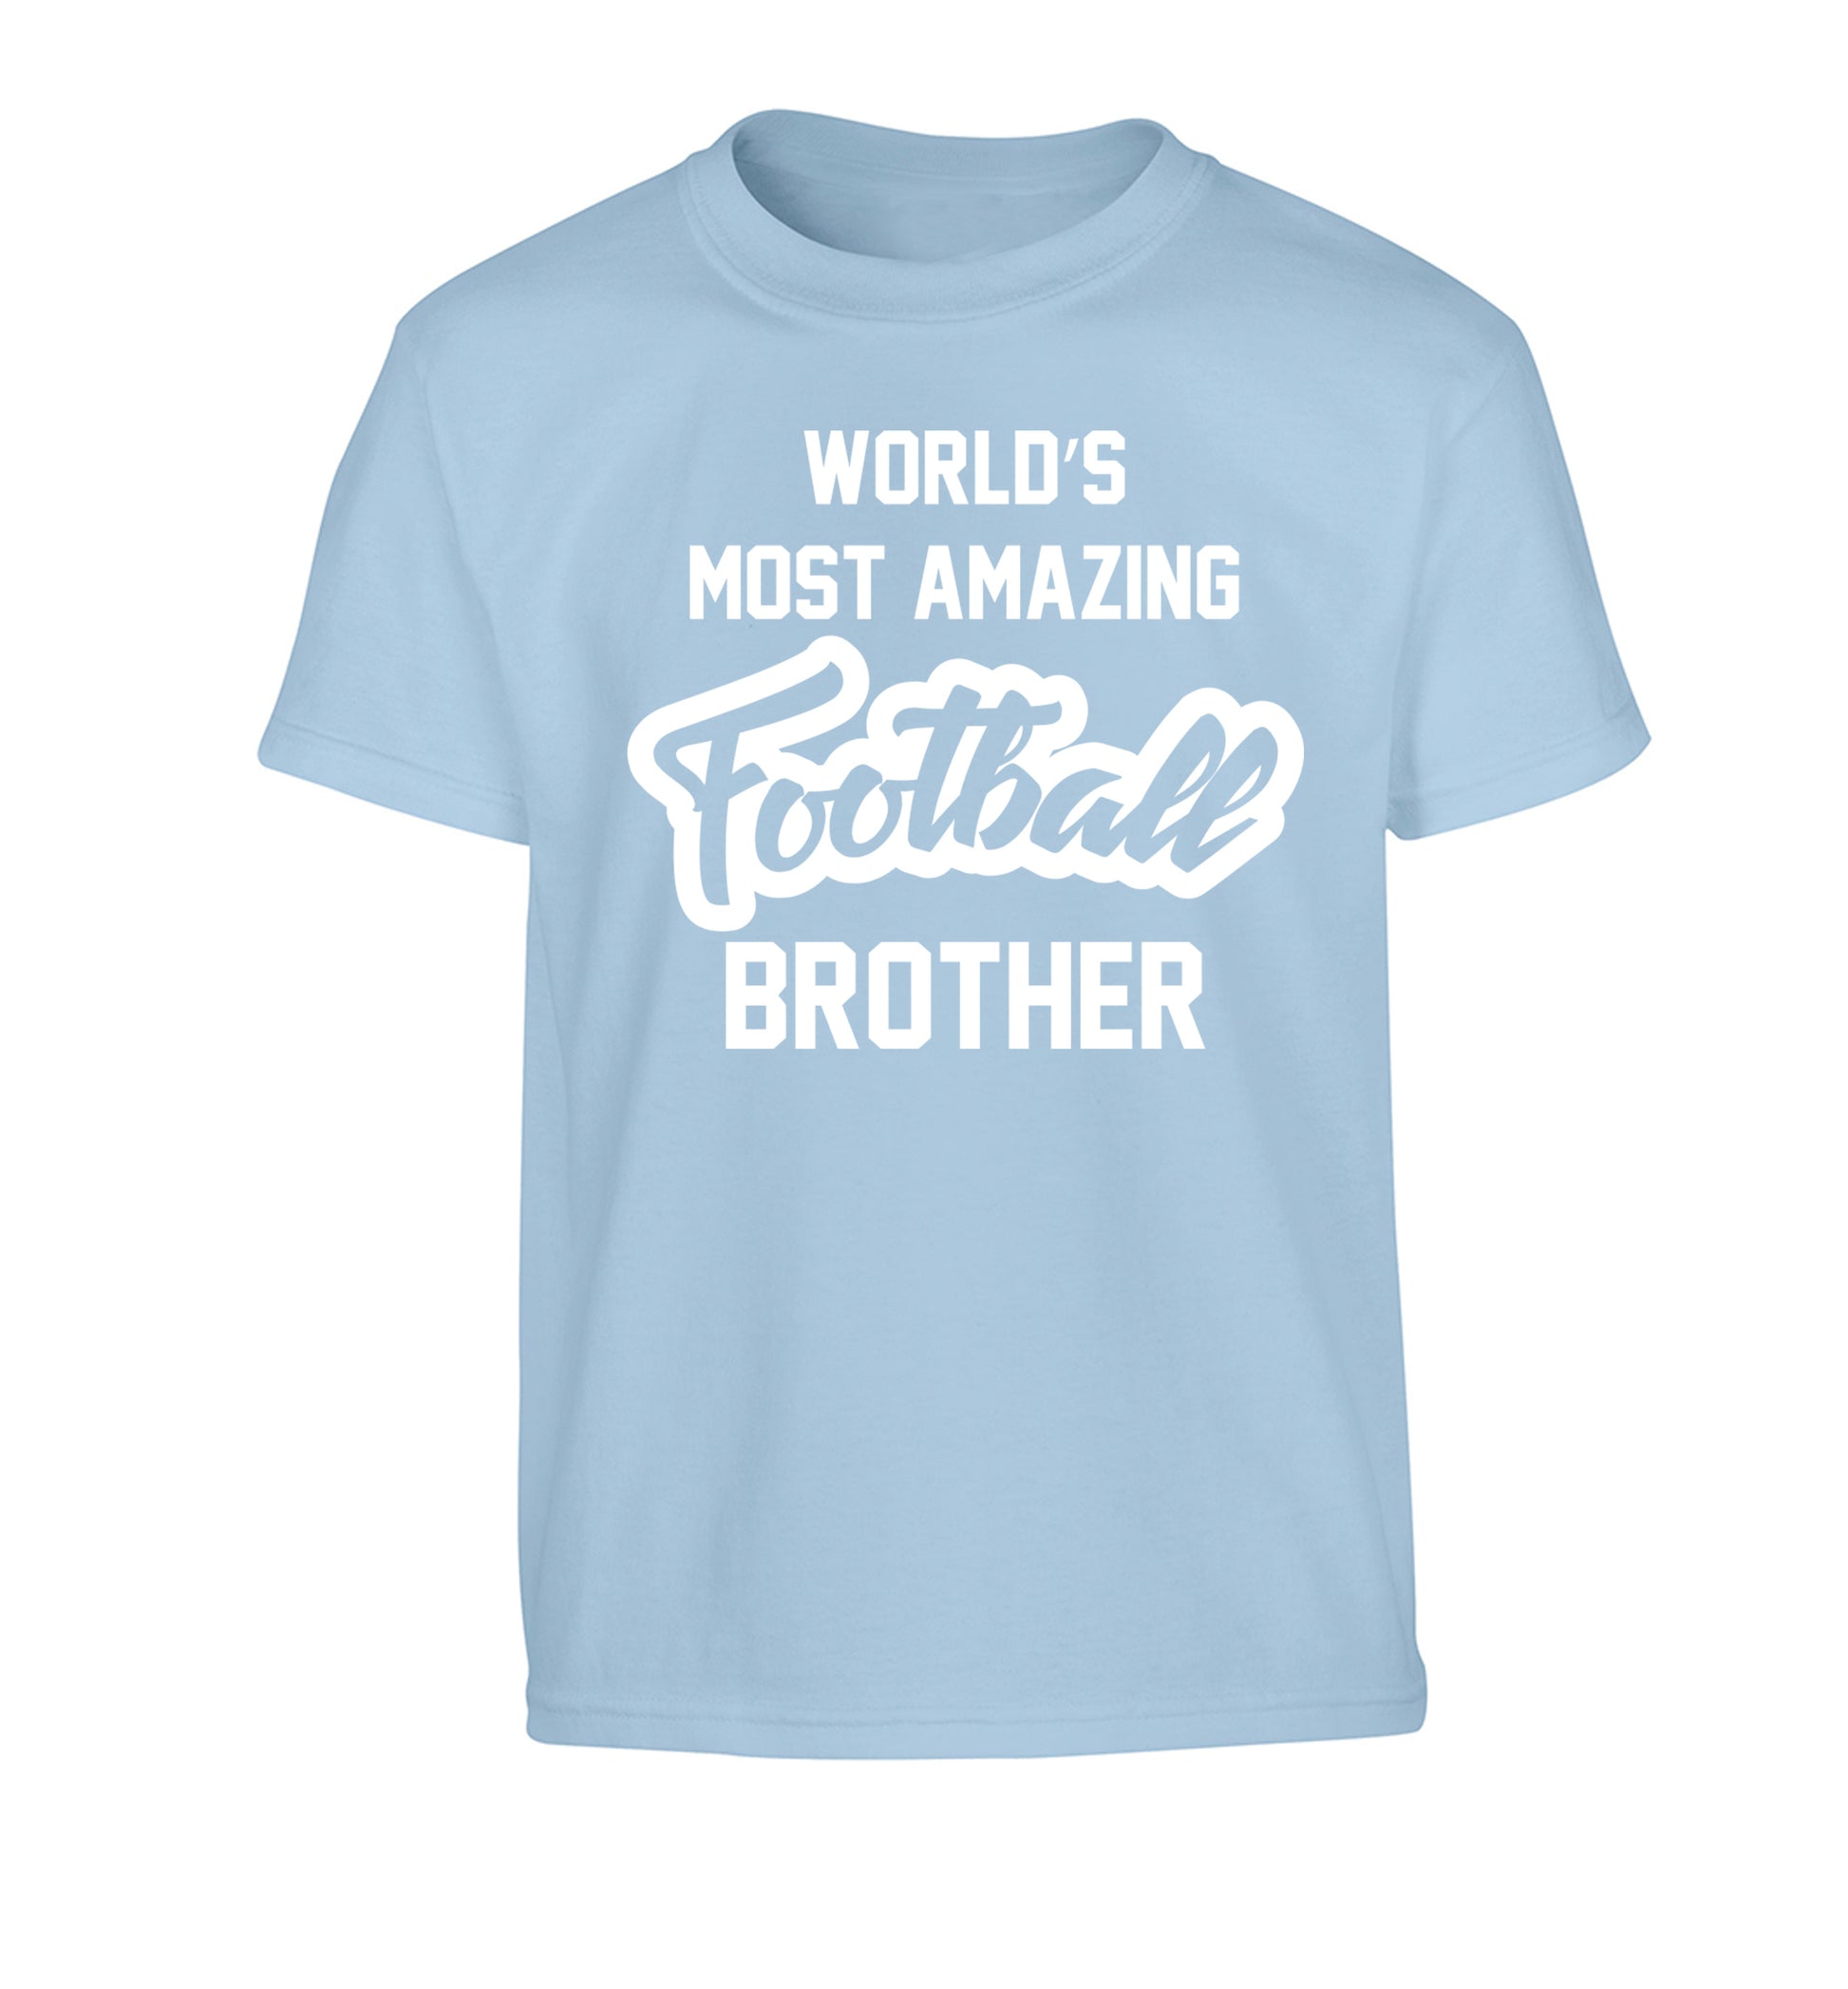 Worlds most amazing football brother Children's light blue Tshirt 12-14 Years